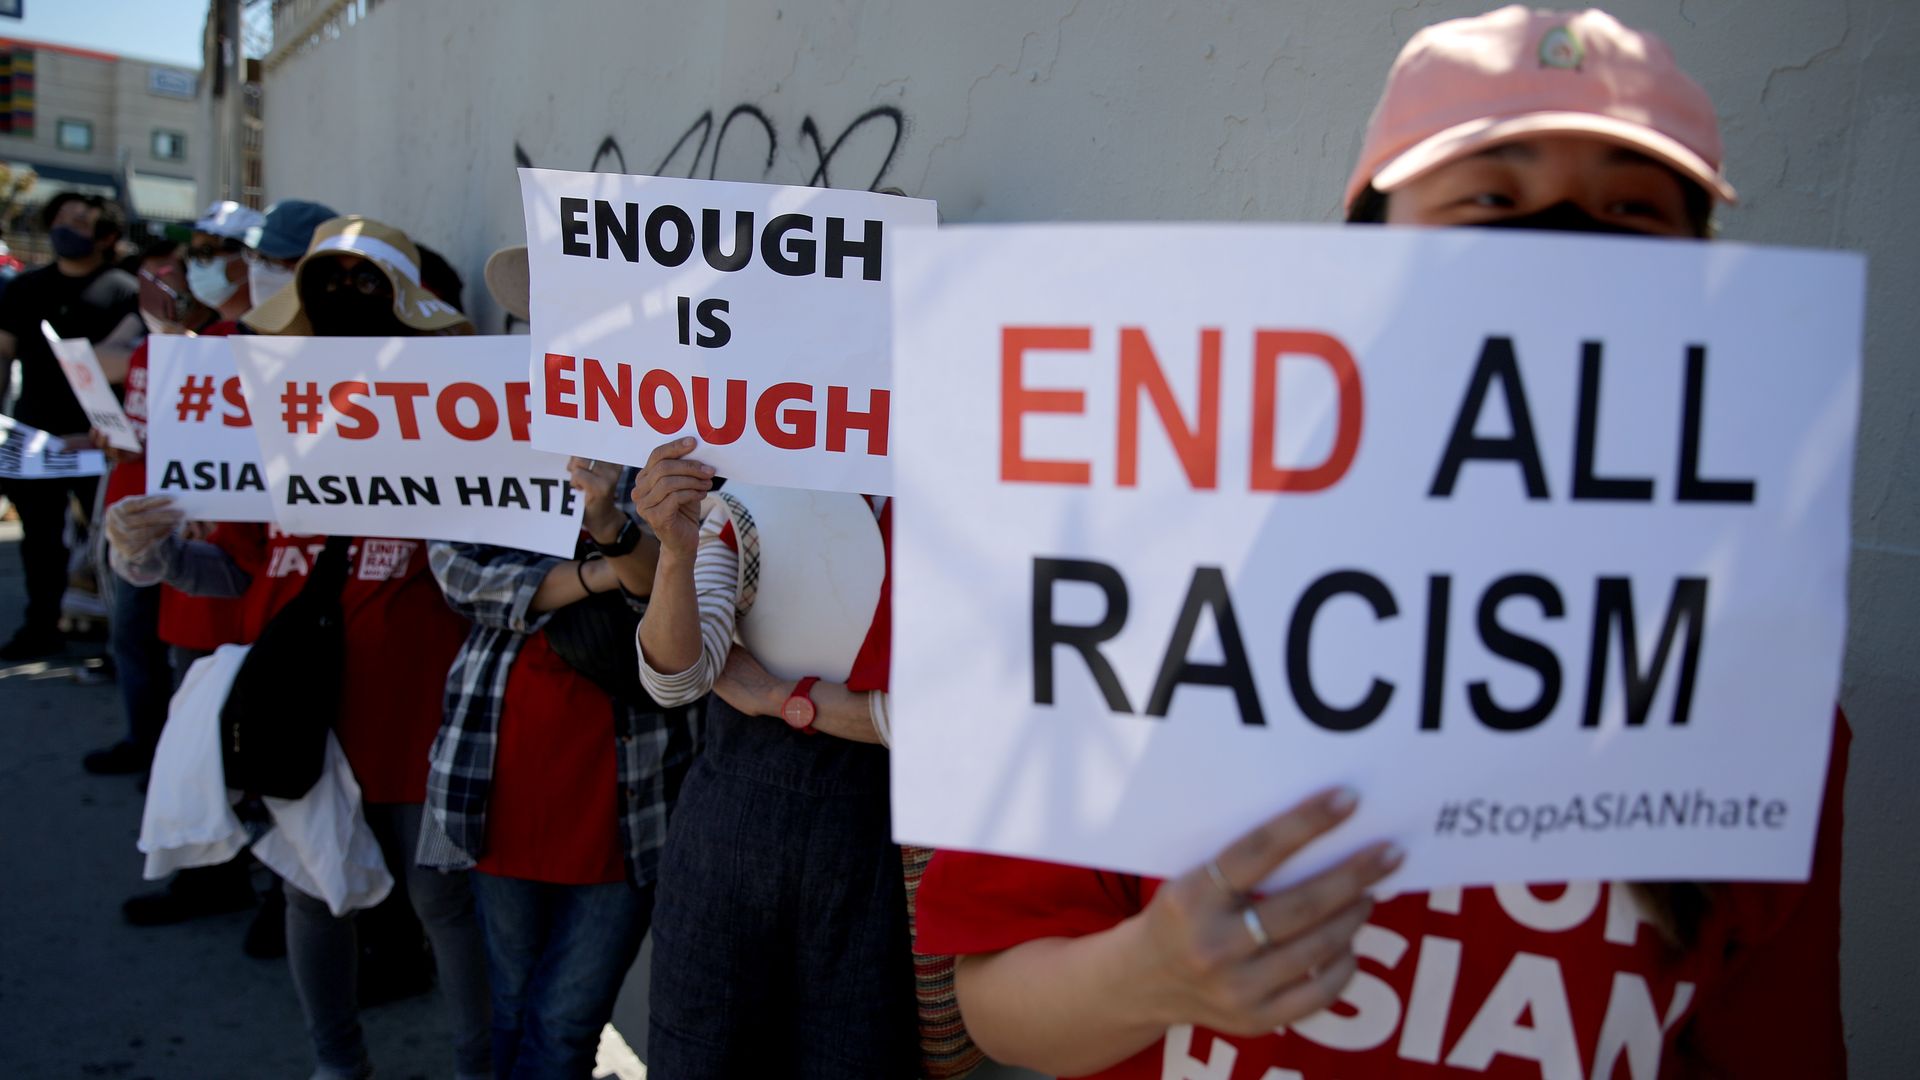 Photo of protesters holding signs that say: "End Racism," "Enough is Enough," and "Stop Asian Hate"